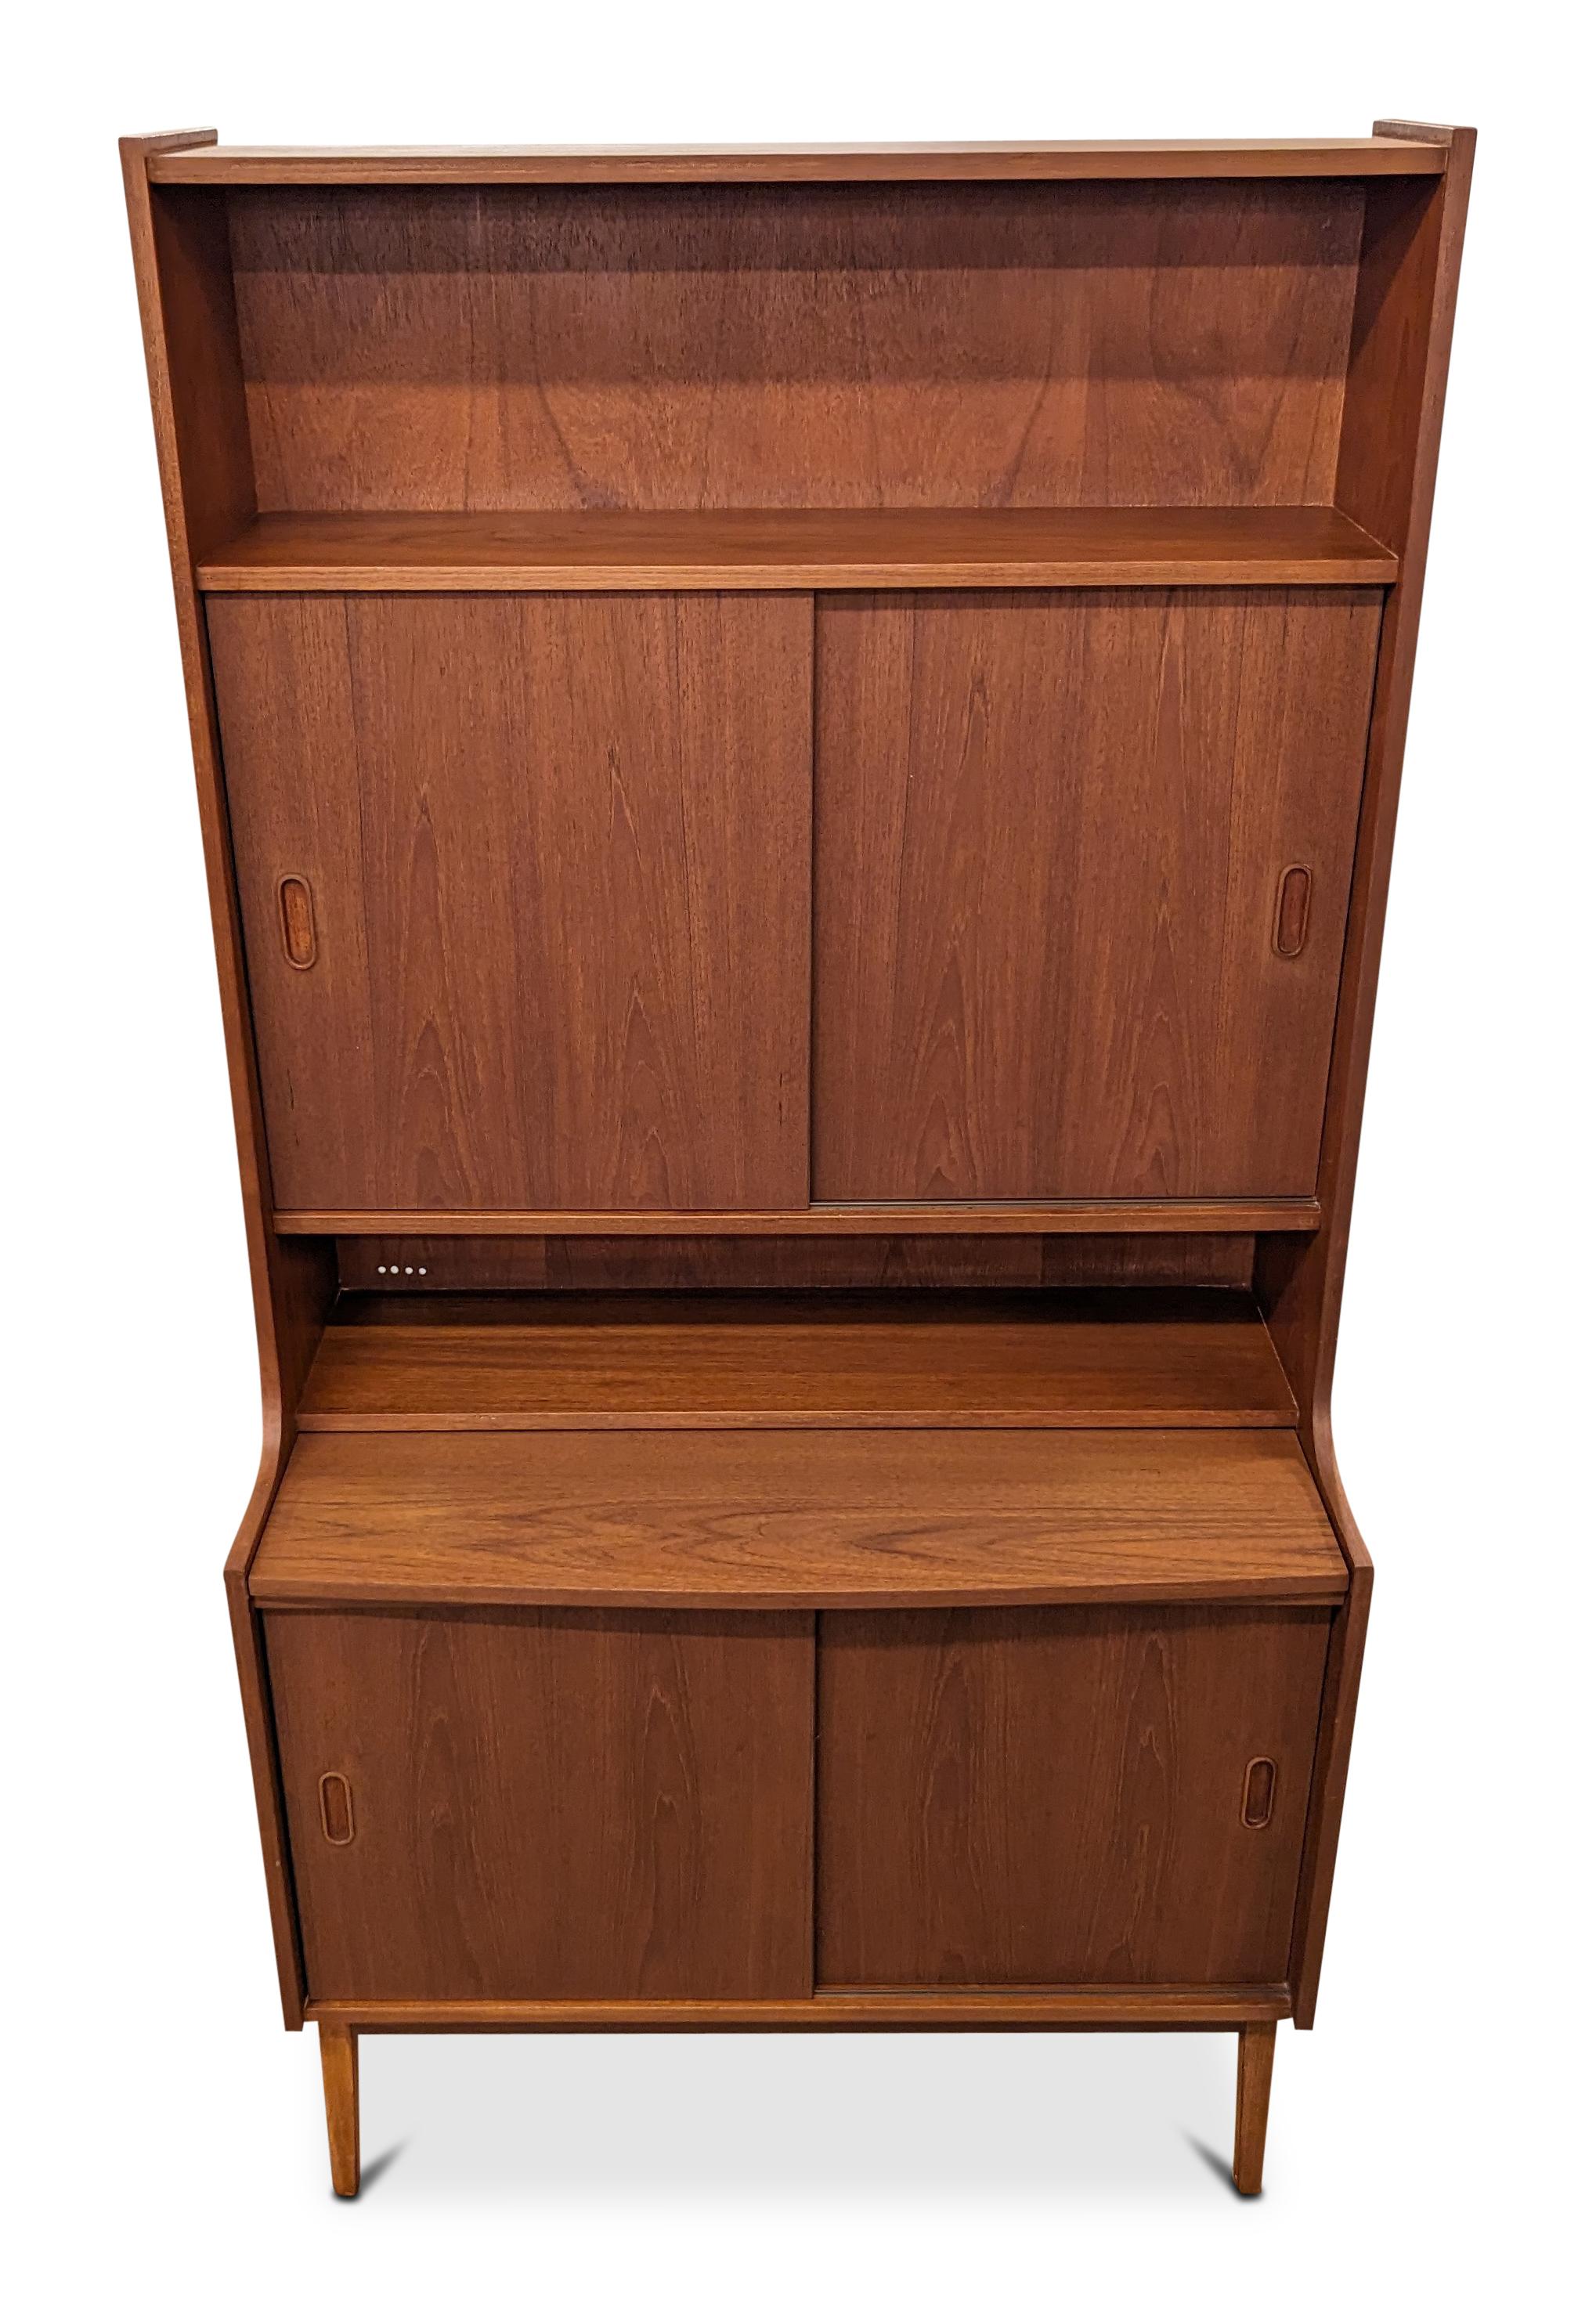 Vintage Danish Mid Century Teak Secretary Bookcase - 022410 In Good Condition For Sale In Brooklyn, NY